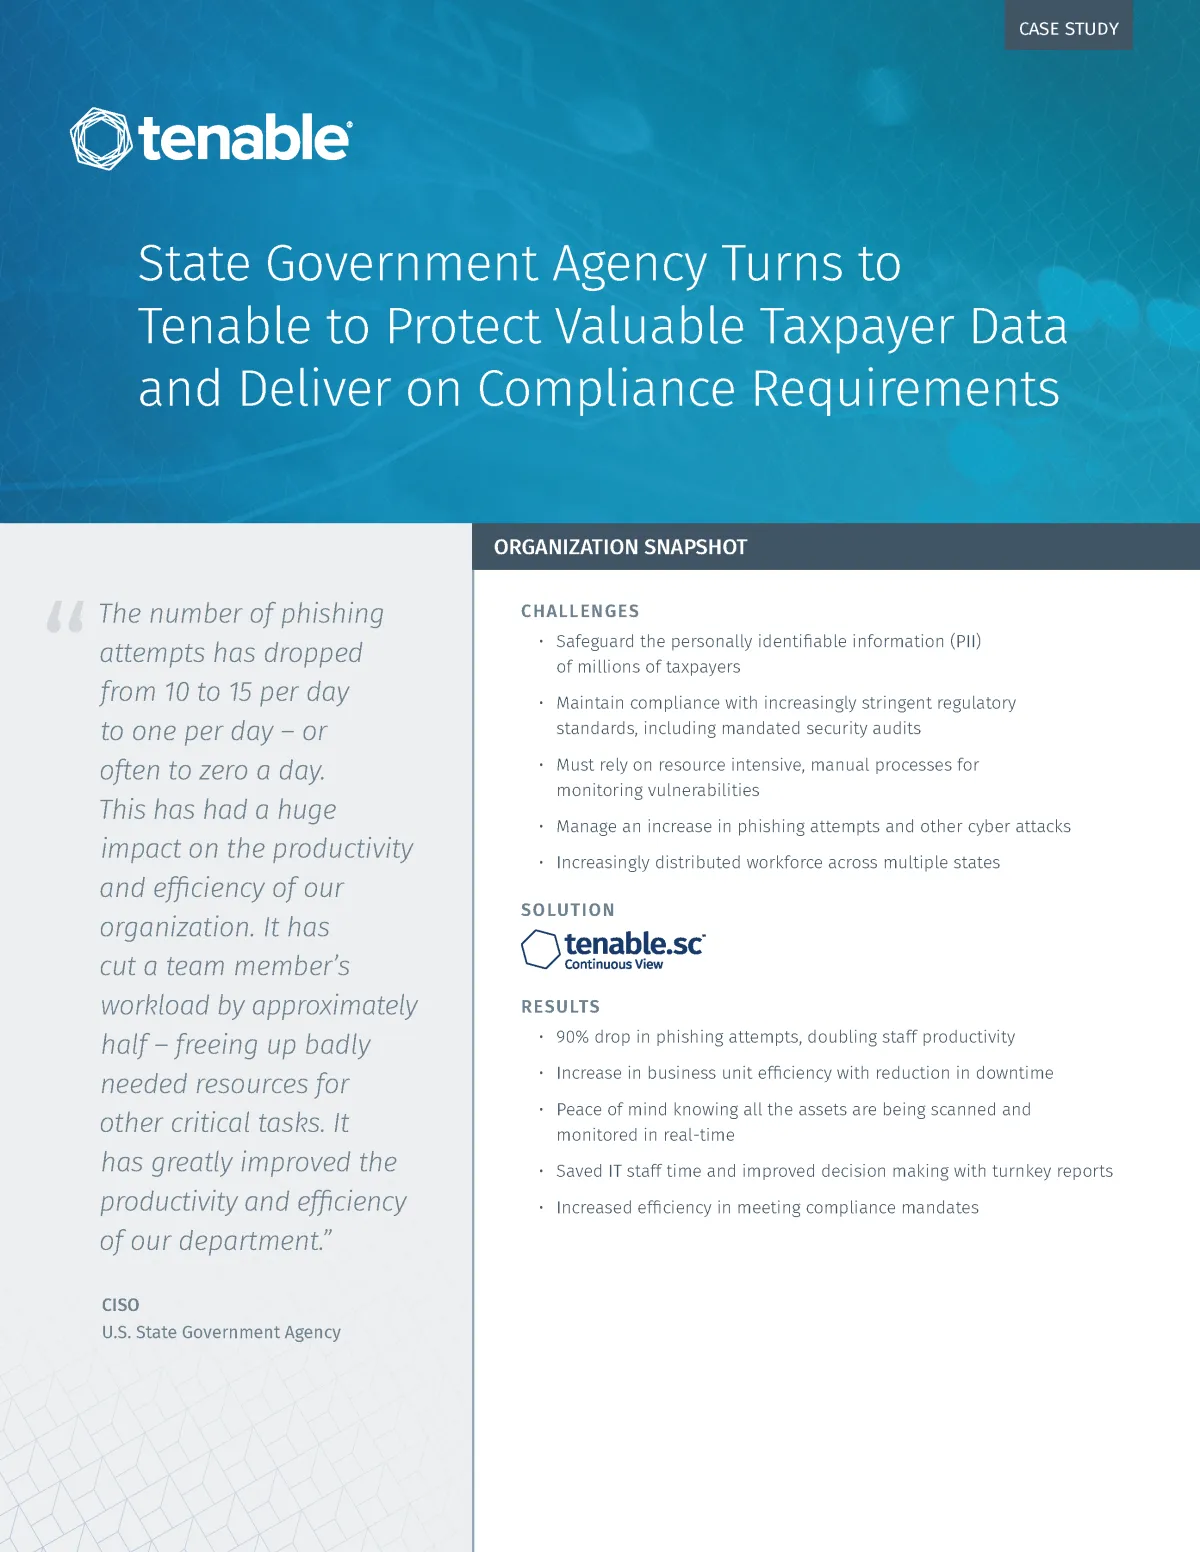 Case Study: US State Government Agency and Tenable.sc